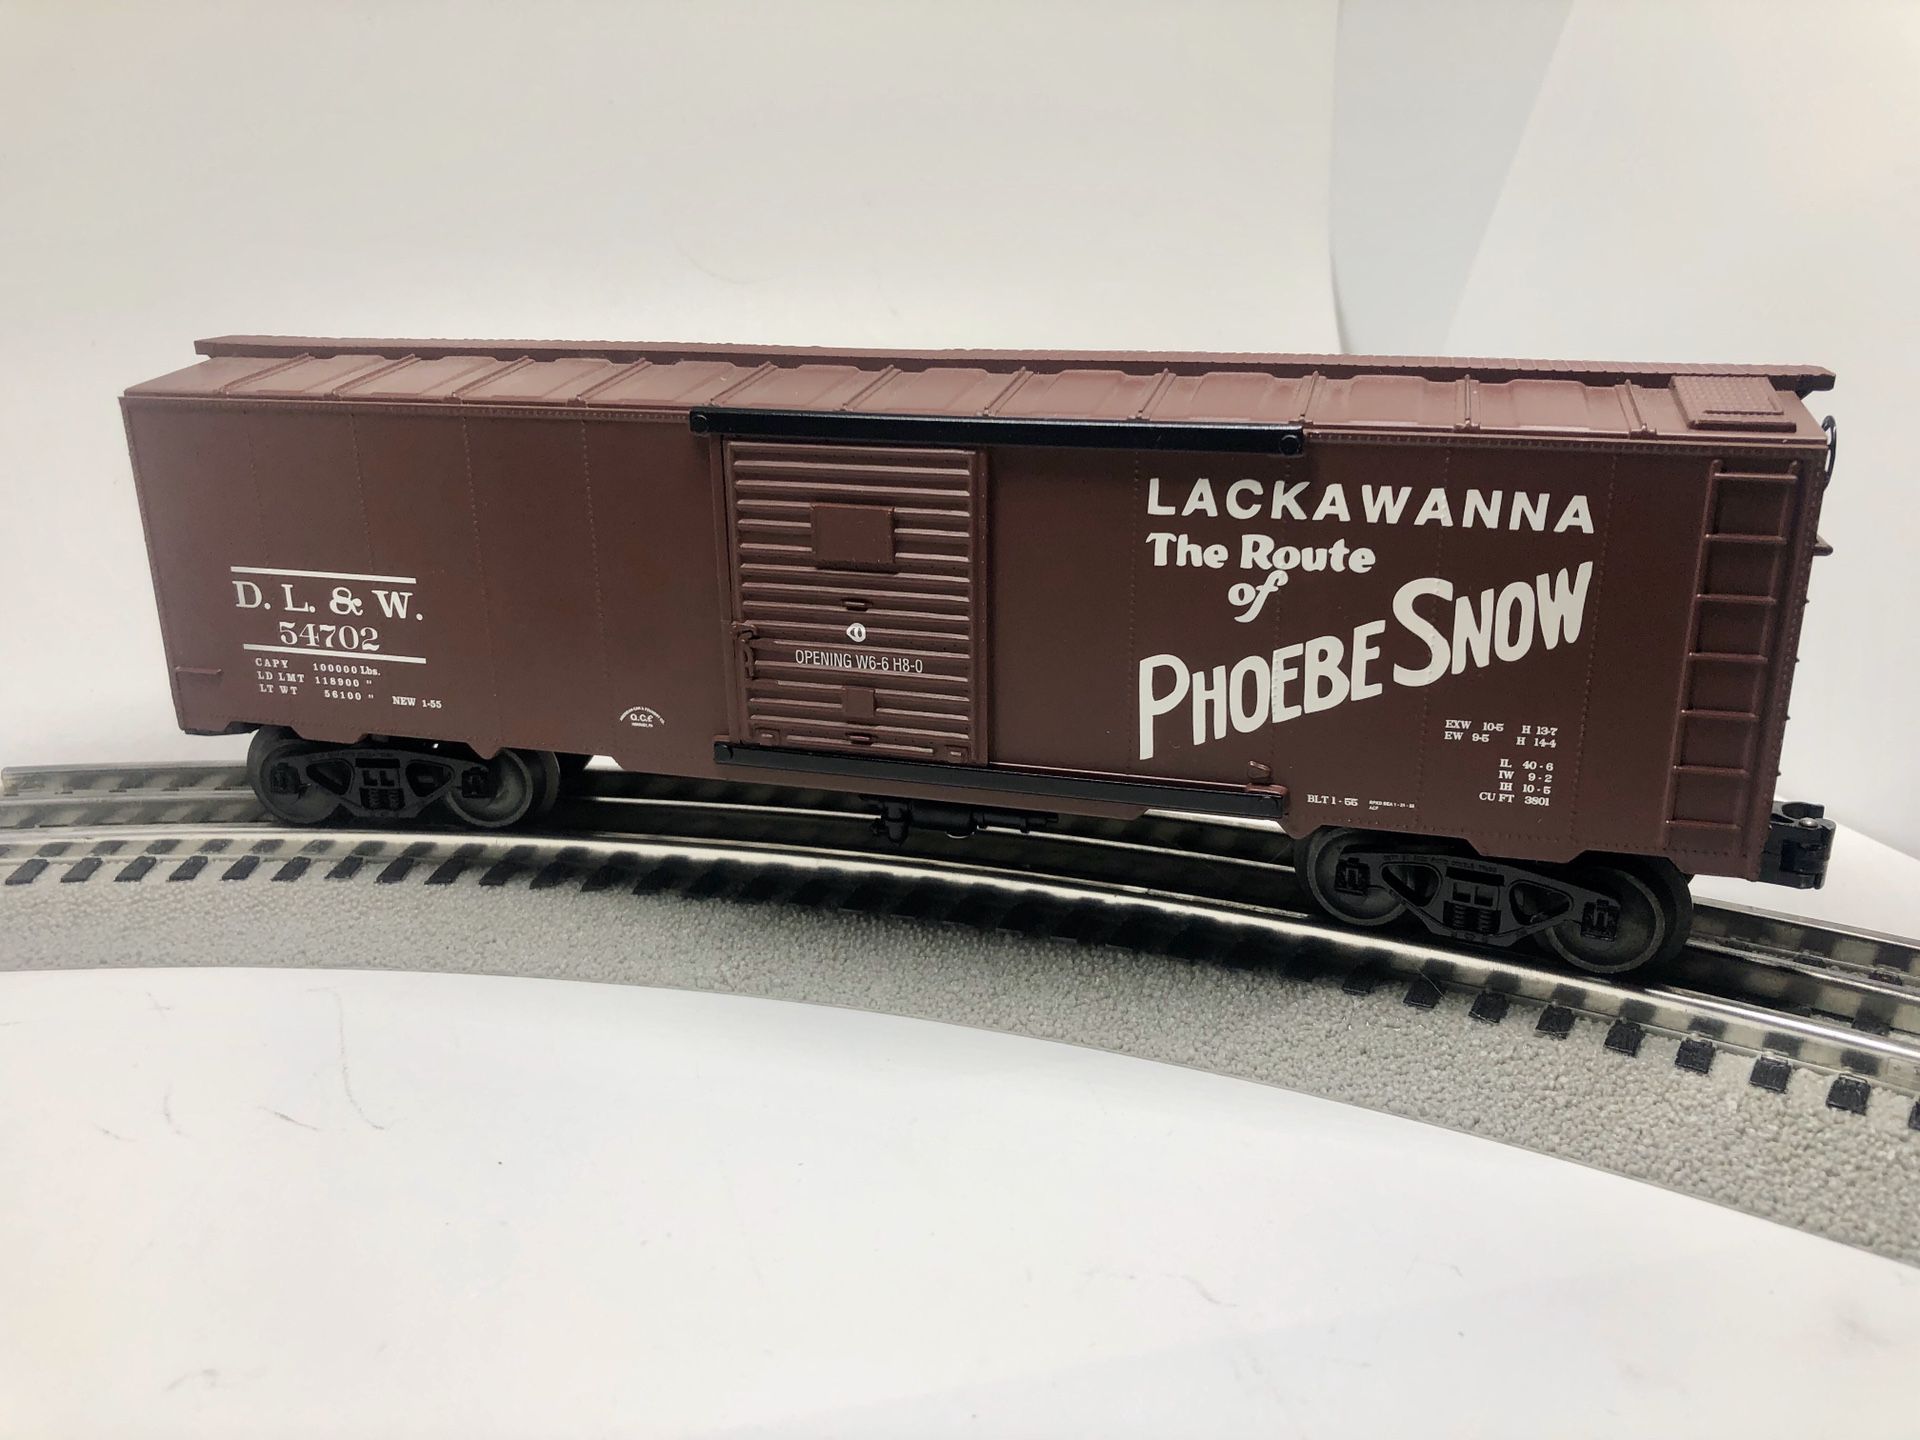 O gauge Williams Bachmann Lackawanna “the route of phoebe snow” D.L. & W. 54702s